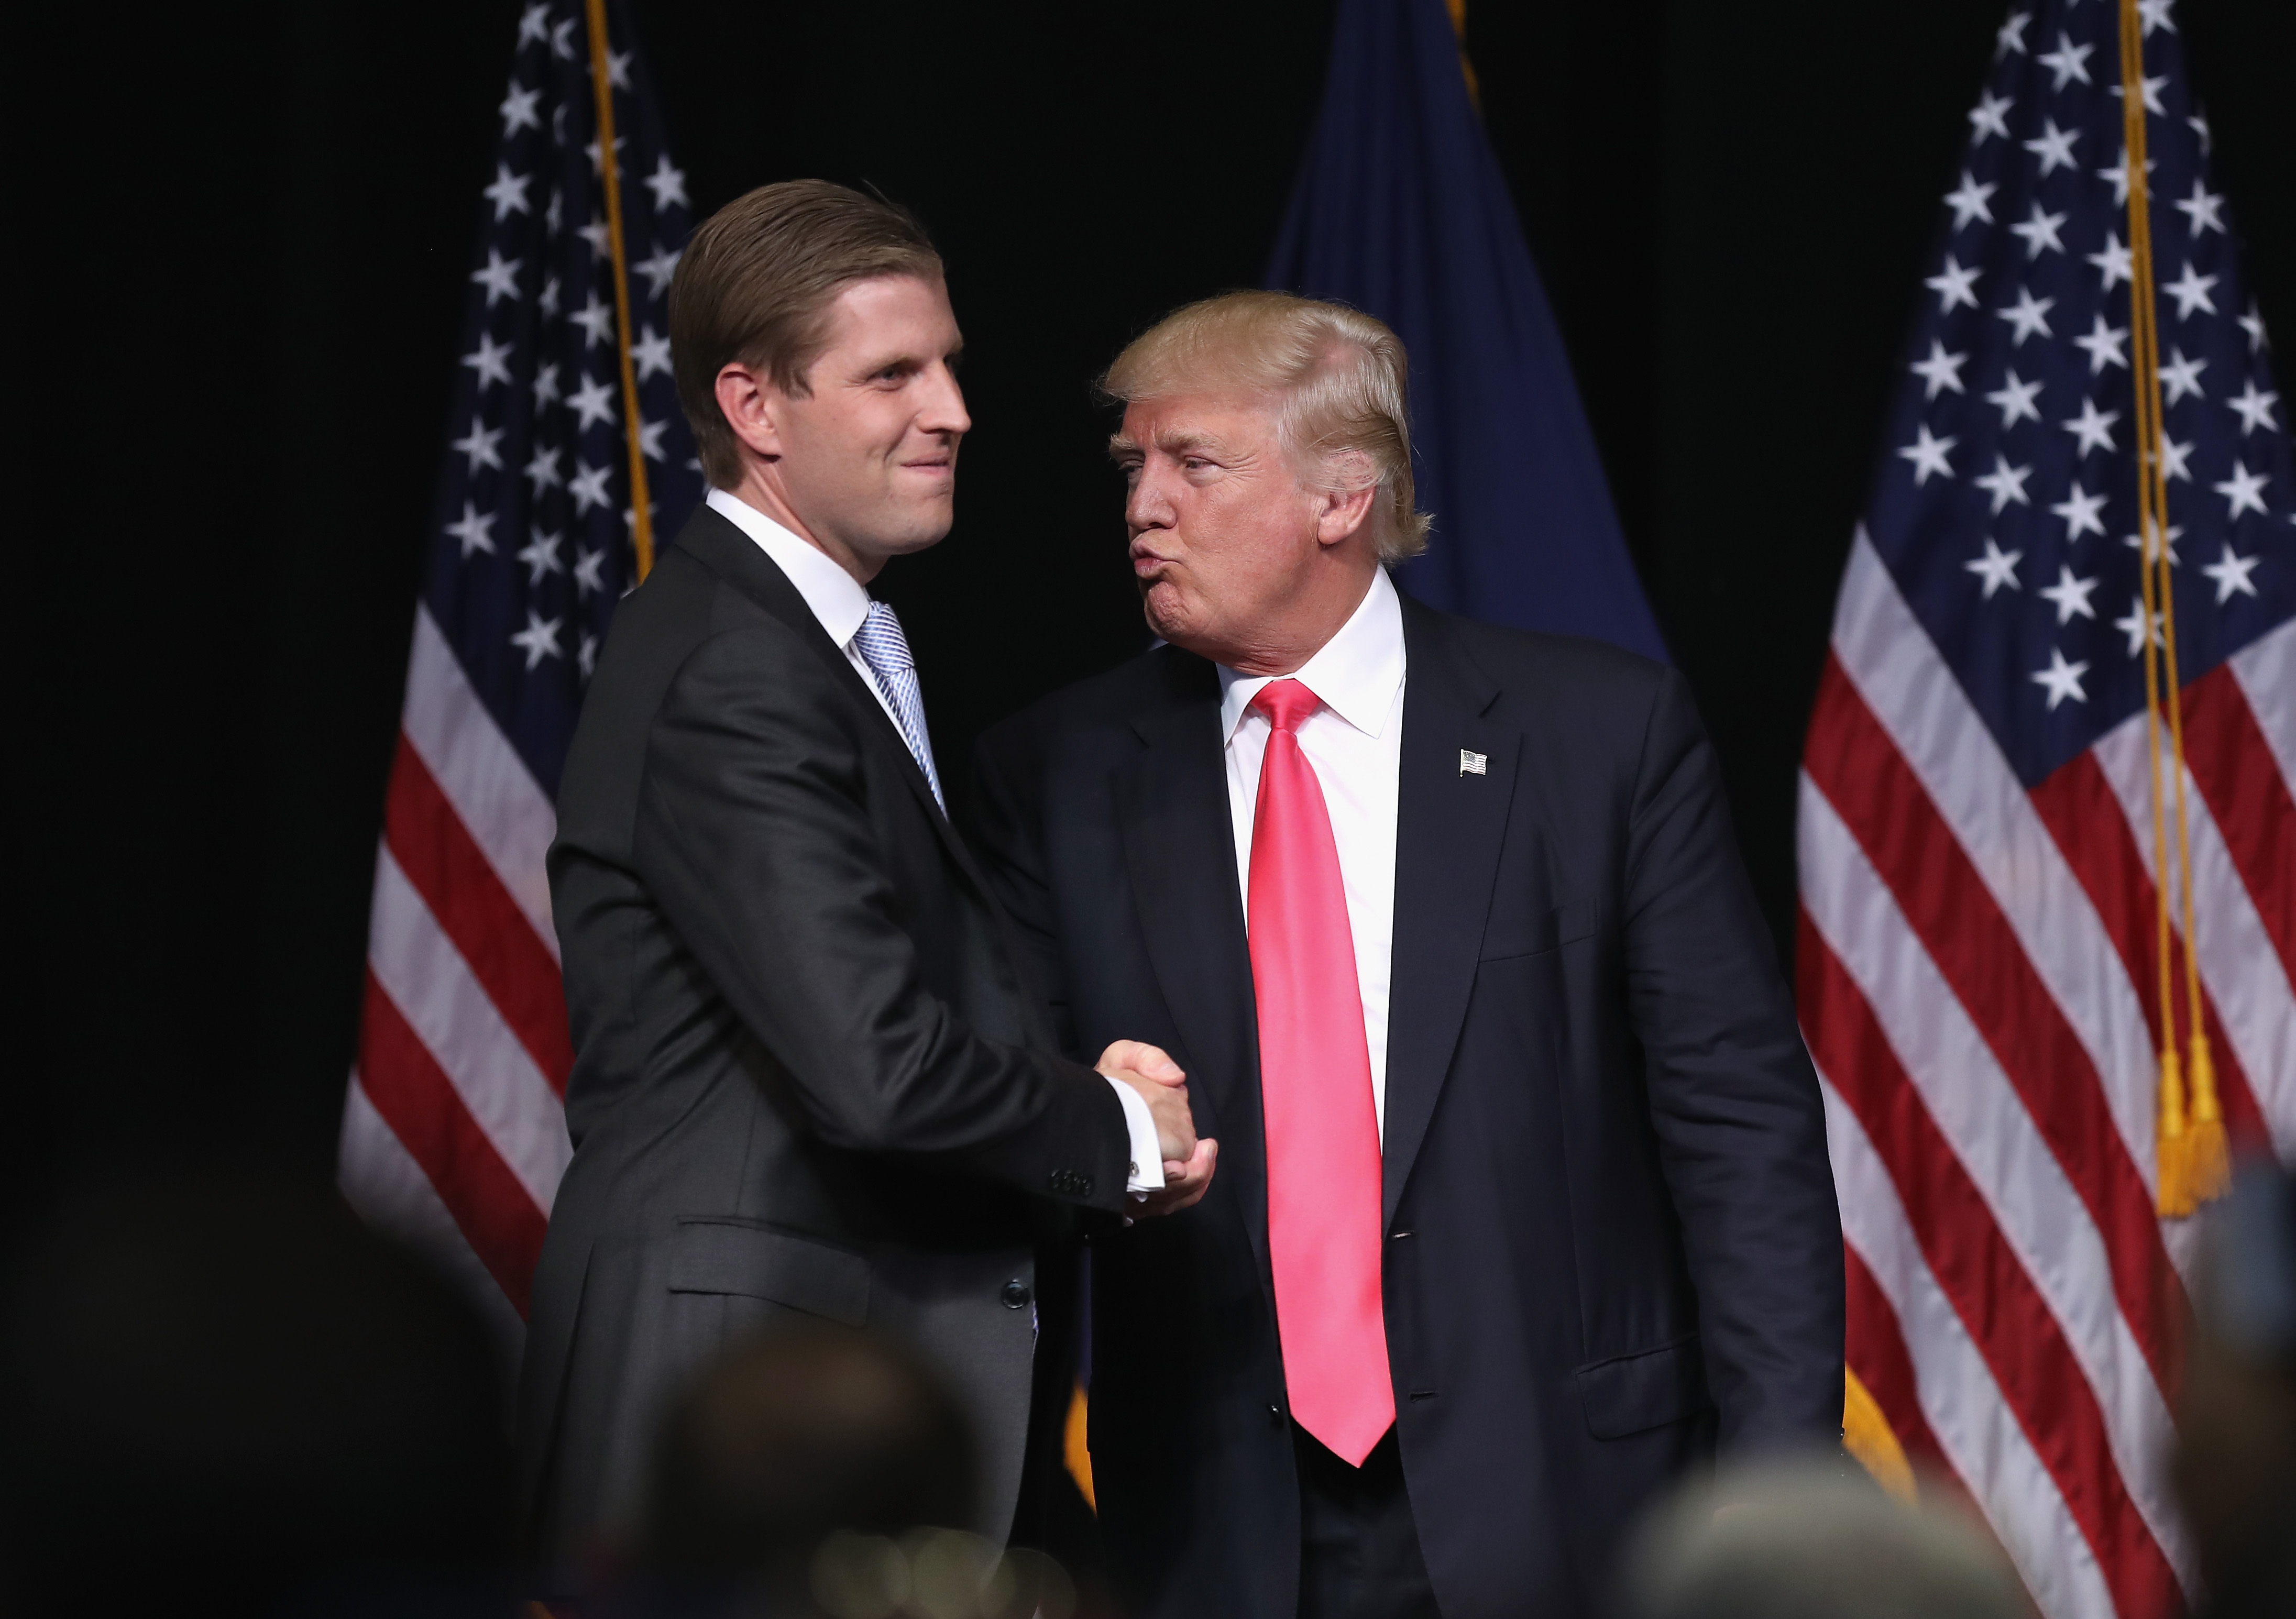 Republican Presidential candidate Donald Trump gives an "air kiss" to his son Eric Trump at a campaign rally in Scranton, Penn., on July 27, 2016.